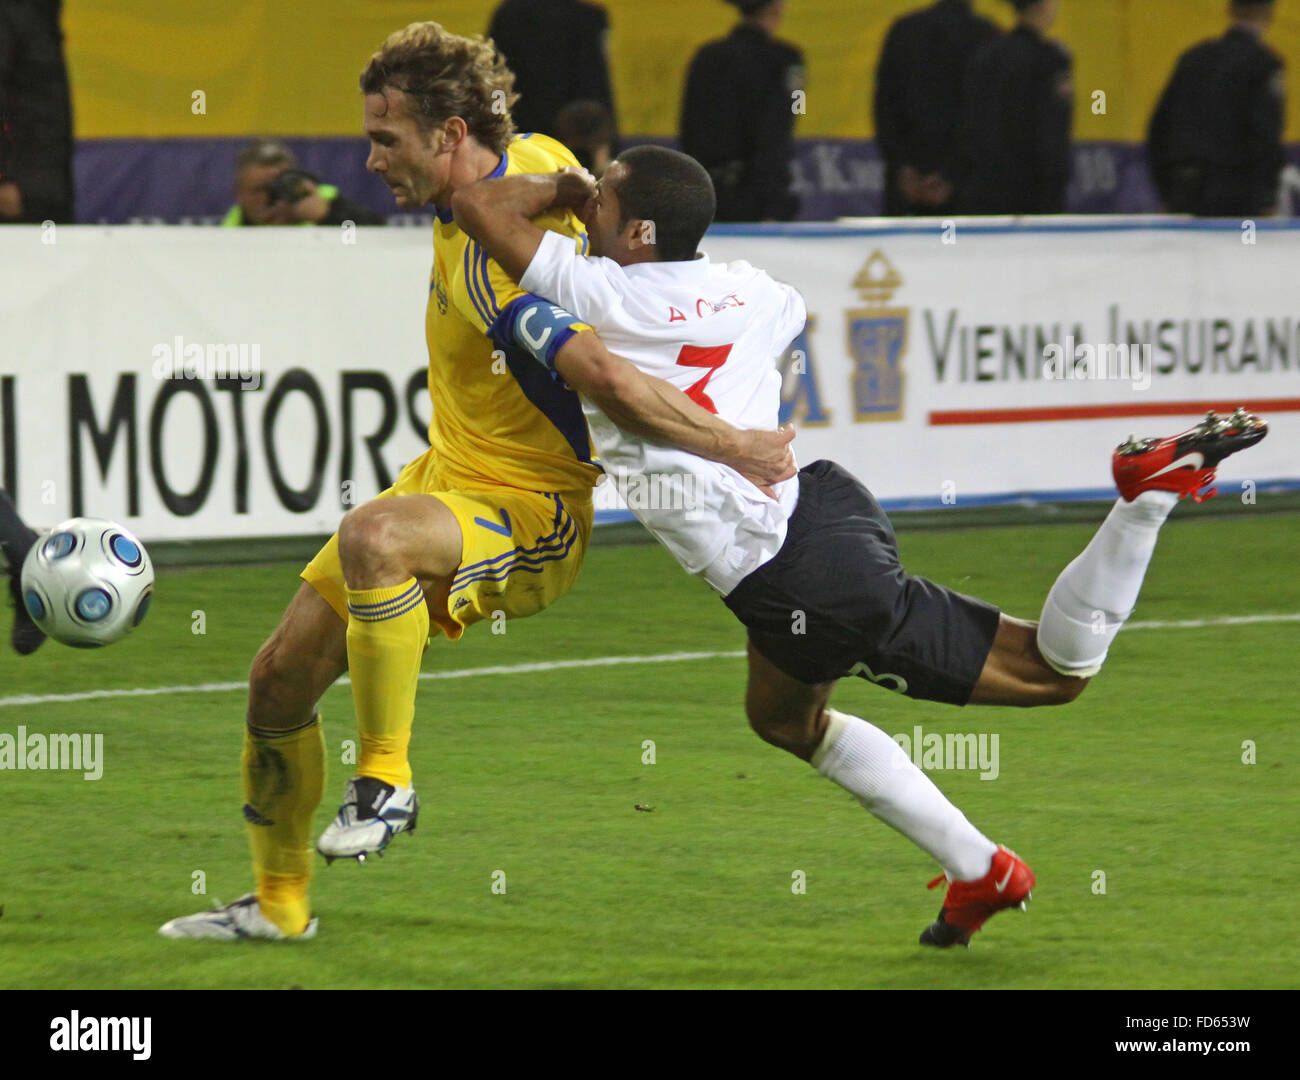 DNIPROPETROVSK, UKRAINE - OCTOBER 10: Andriy Shevchenko (L) of Ukraine fights for a ball with Ashley Cole (R) of England during the WC2010 Group 6 qualifying football match at the Dnipro Arena on October 10, 2009 in Dnepropetrovsk. Ukraine won 1-0 Stock Photo